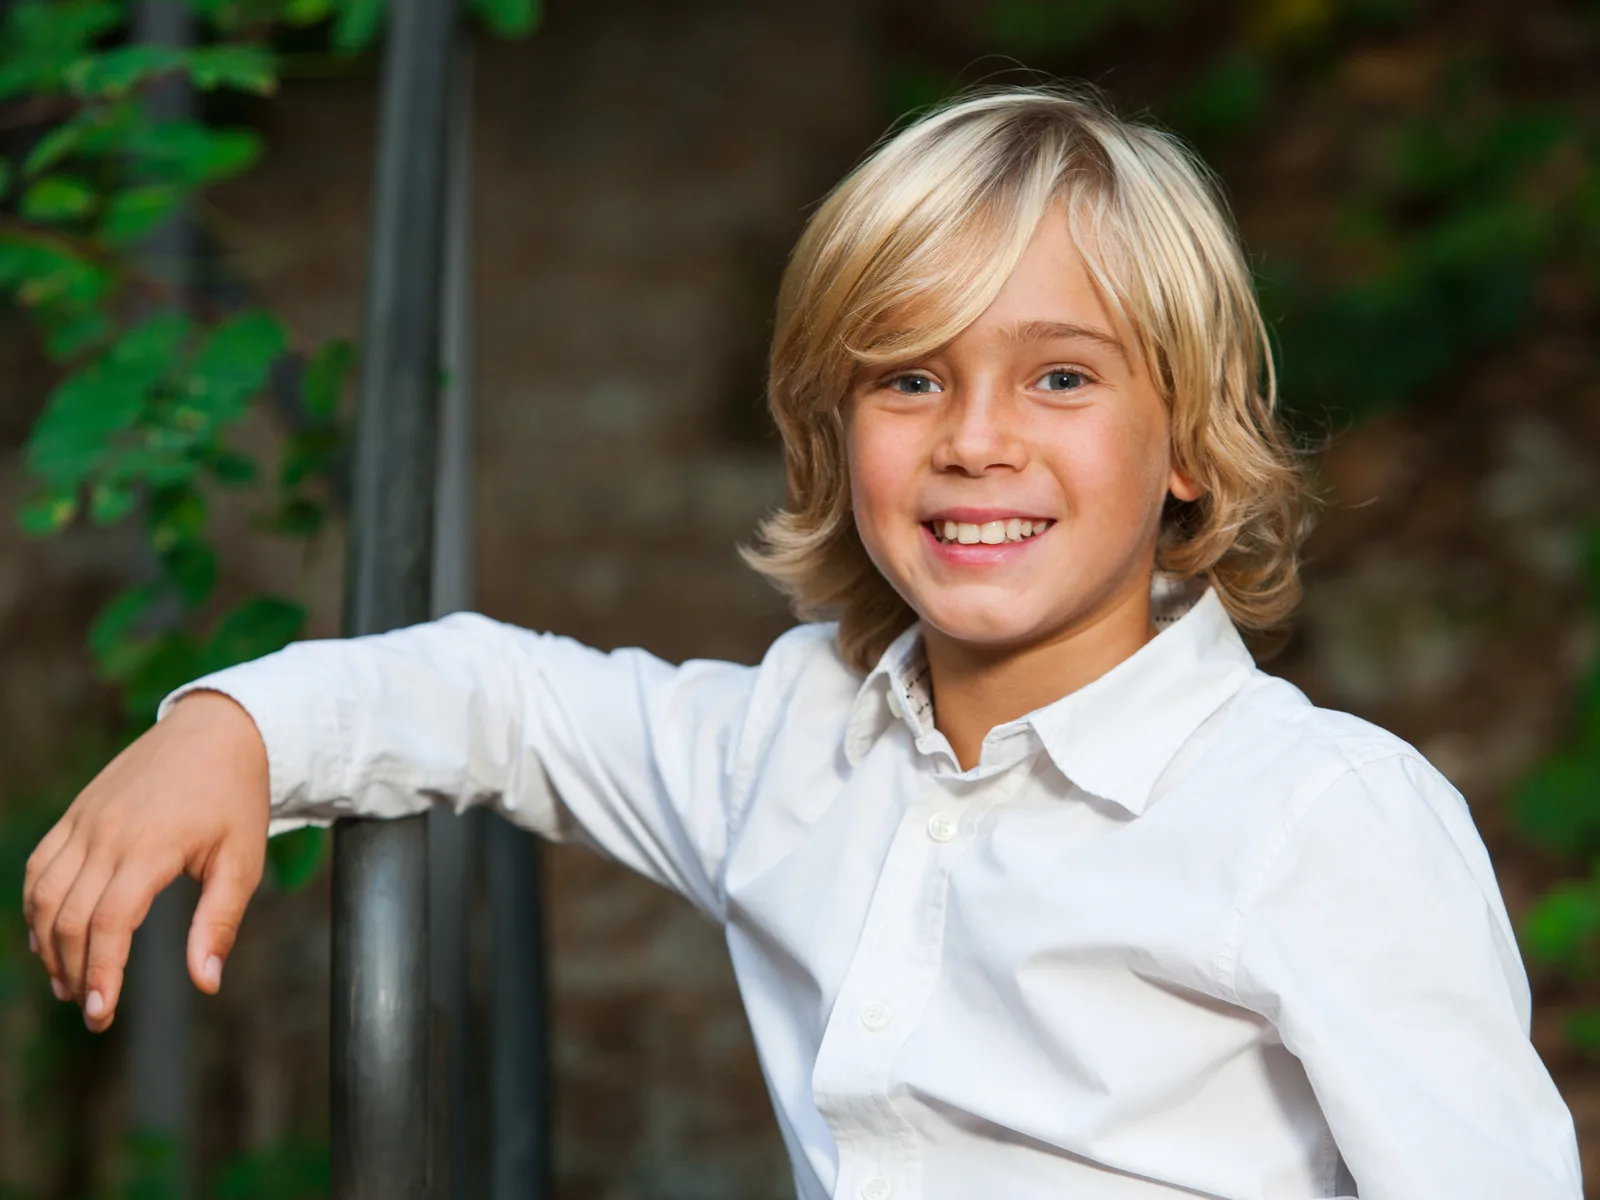 Clean-Cut Surfer Boy Shoulder Bob, a featured long hairstyle for boys